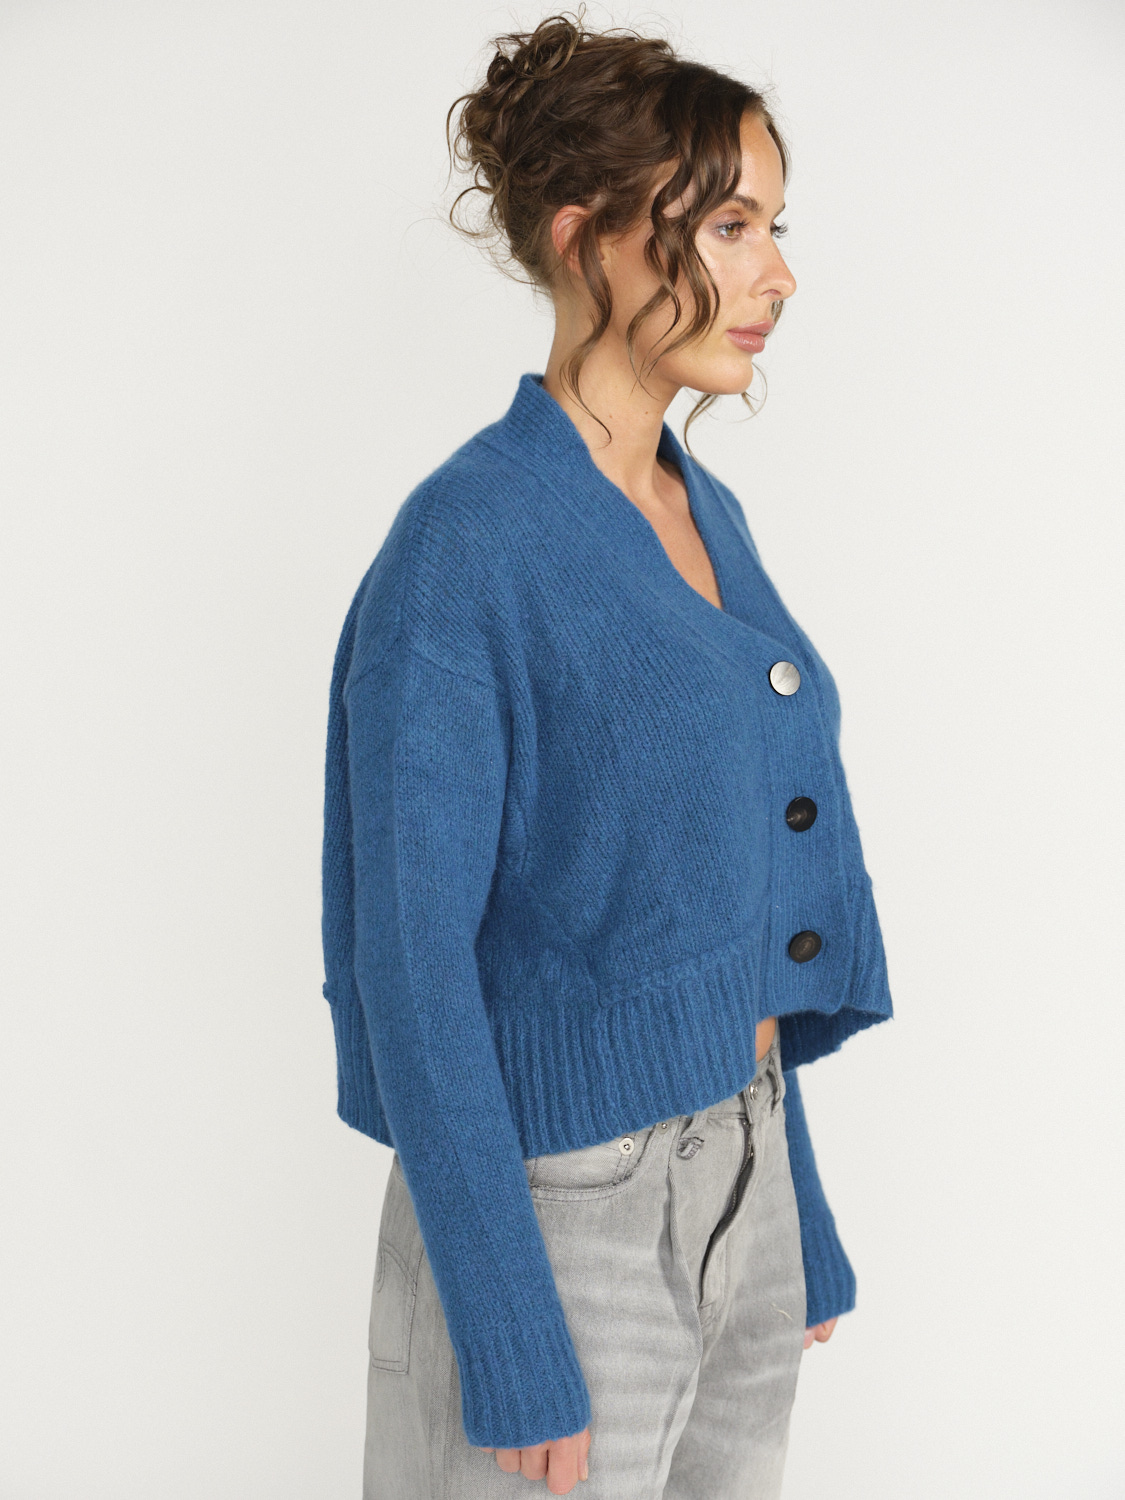 LU Ren Riely D. - Oversized cardigan with button placket blue XS